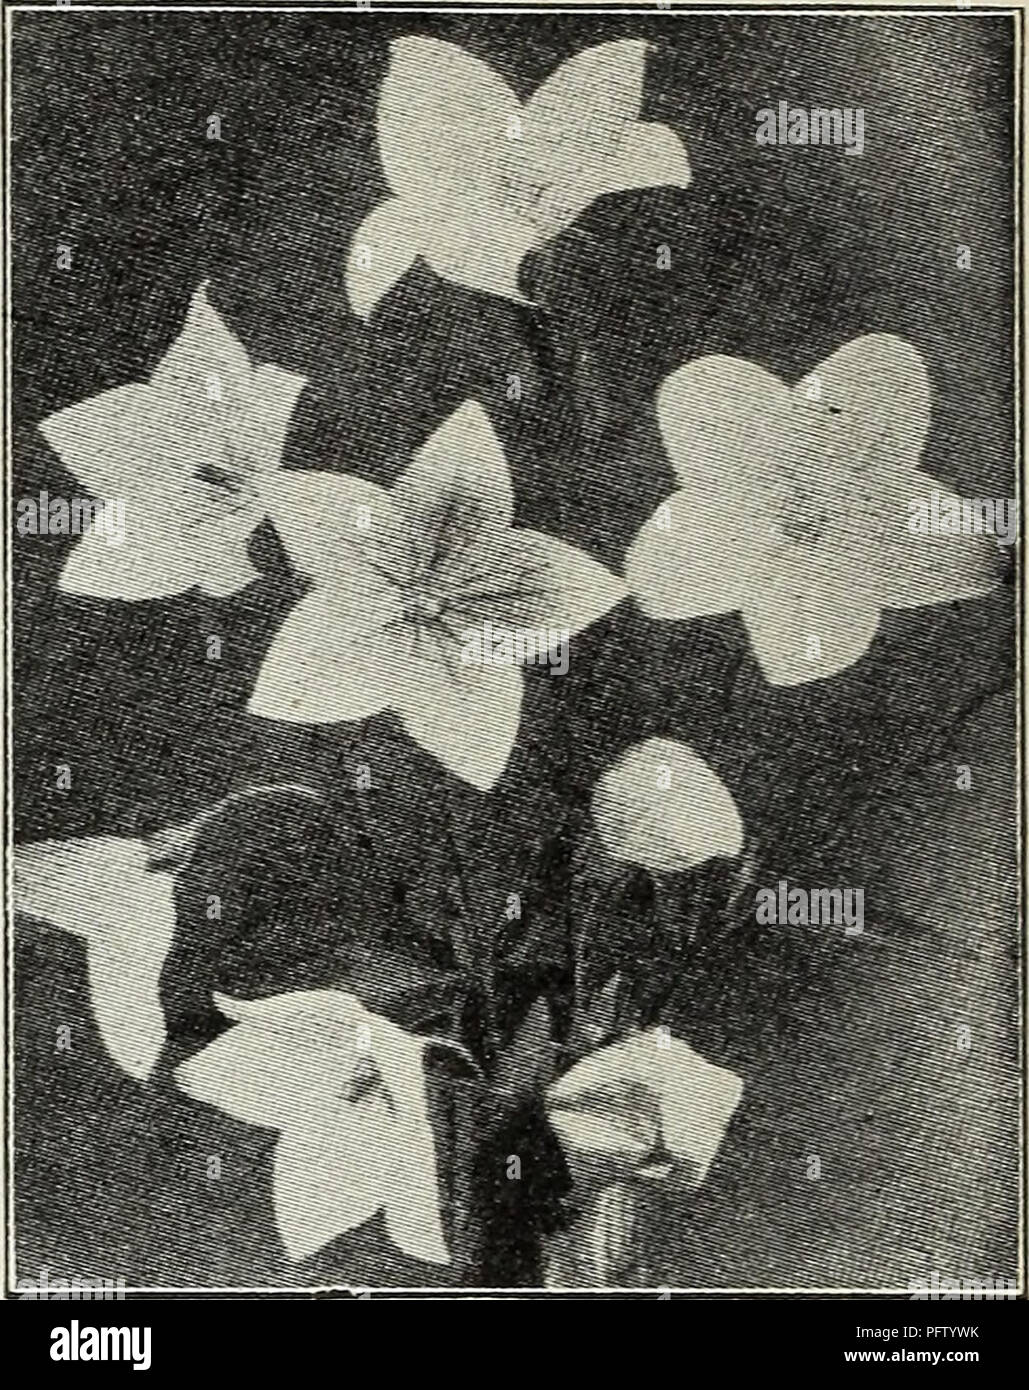 . Currie's autumn 1929 54th year bulbs and plants. Flowers Seeds Catalogs; Bulbs (Plants) Seeds Catalogs; Nurseries (Horticulture) Catalogs; Plants, Ornamental Catalogs. RANUNCULUS (Buttercup) Acris fl. pi.—Double golden-yellow flowers. Repens, fl. pi.—A creeping variety with golden-yellow flowers. Price, each, 25c; per doz., ^2.50. RUDEBECKIA (Cone Flowers) Fulgida—Orange yellow with black center. Golden Glow—Grows 6 feet high, bearing masses of double golden-yellow flowers. Purpurea—Large, reddish-purple flowers with brown cone. Price, each, 25c; per dozen, ^2.50. SALVIA (Meadow Sage) Azurea Stock Photo